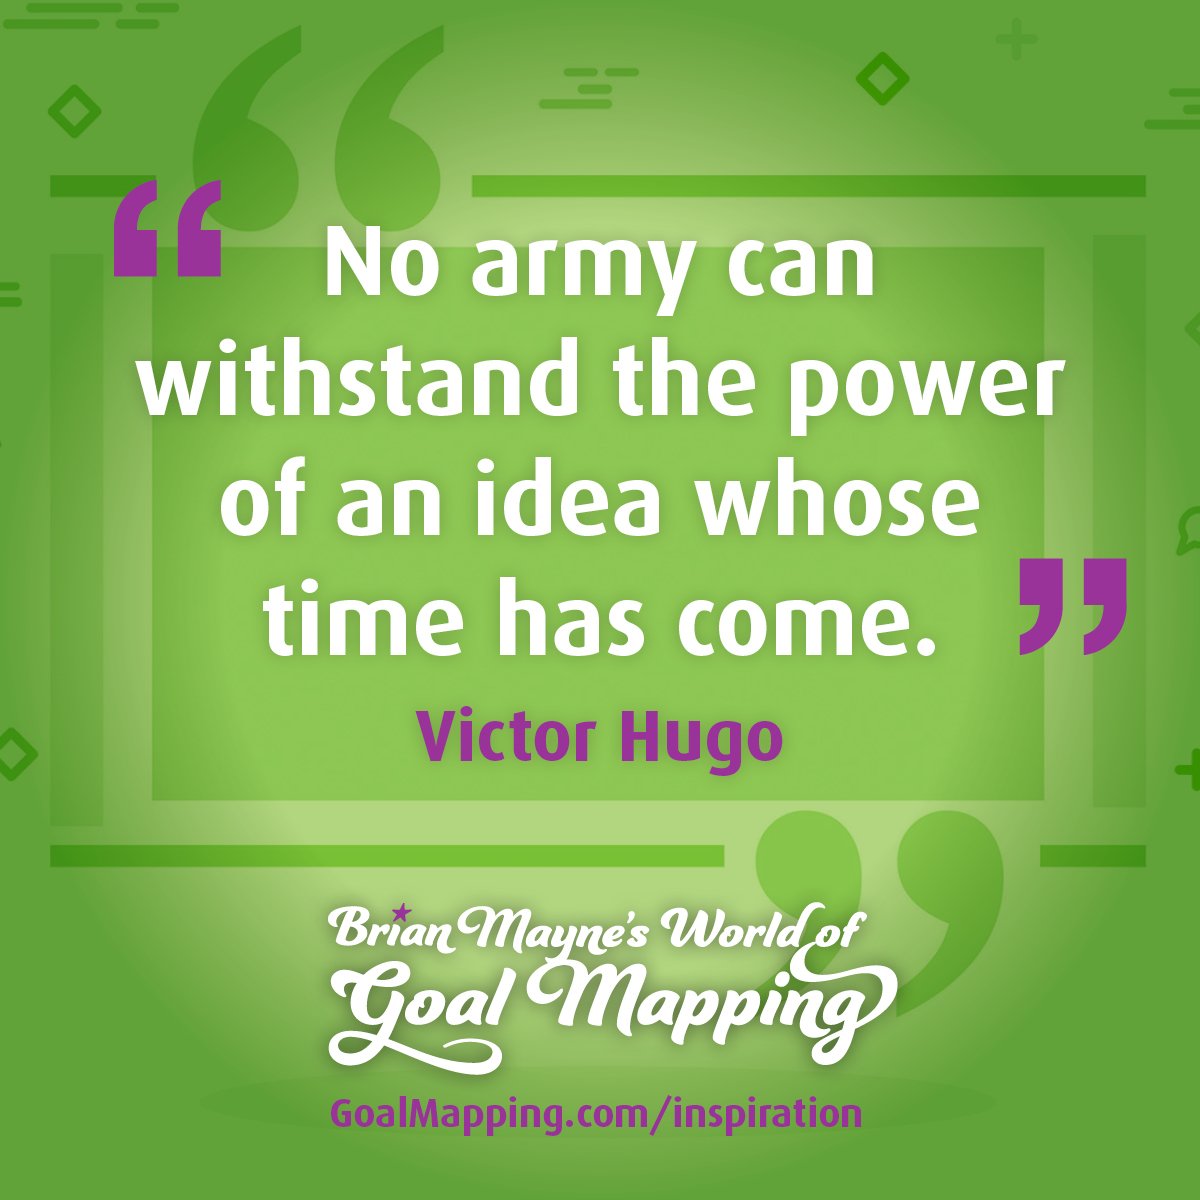 "No army can withstand the power of an idea whose time has come." Victor Hugo